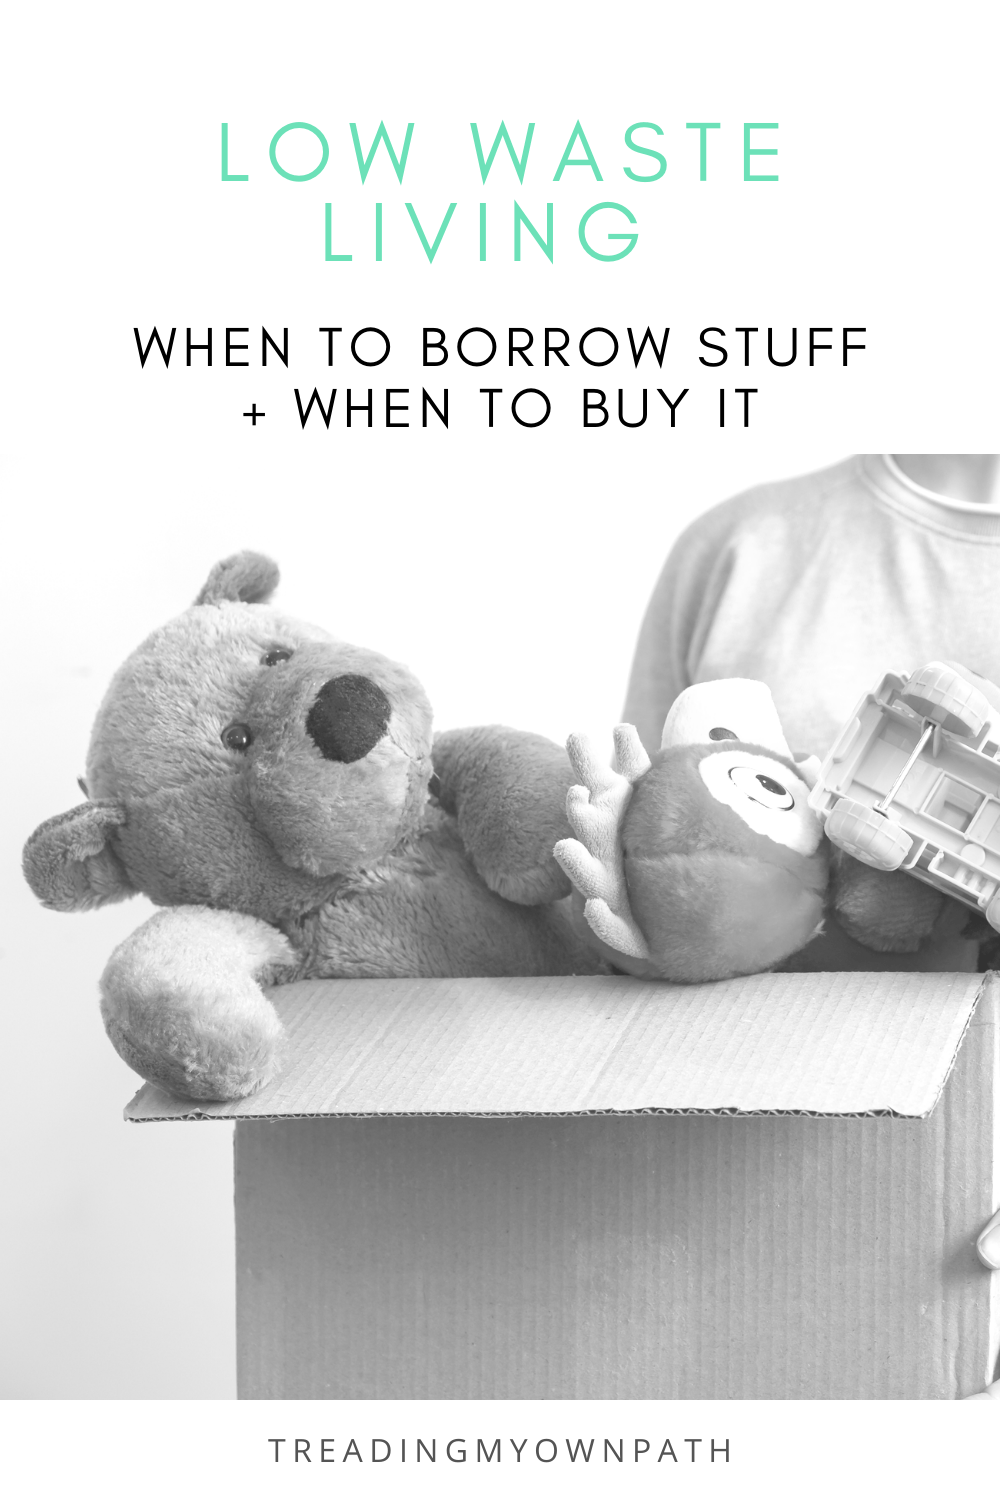 Low waste living: when to borrow and when to buy